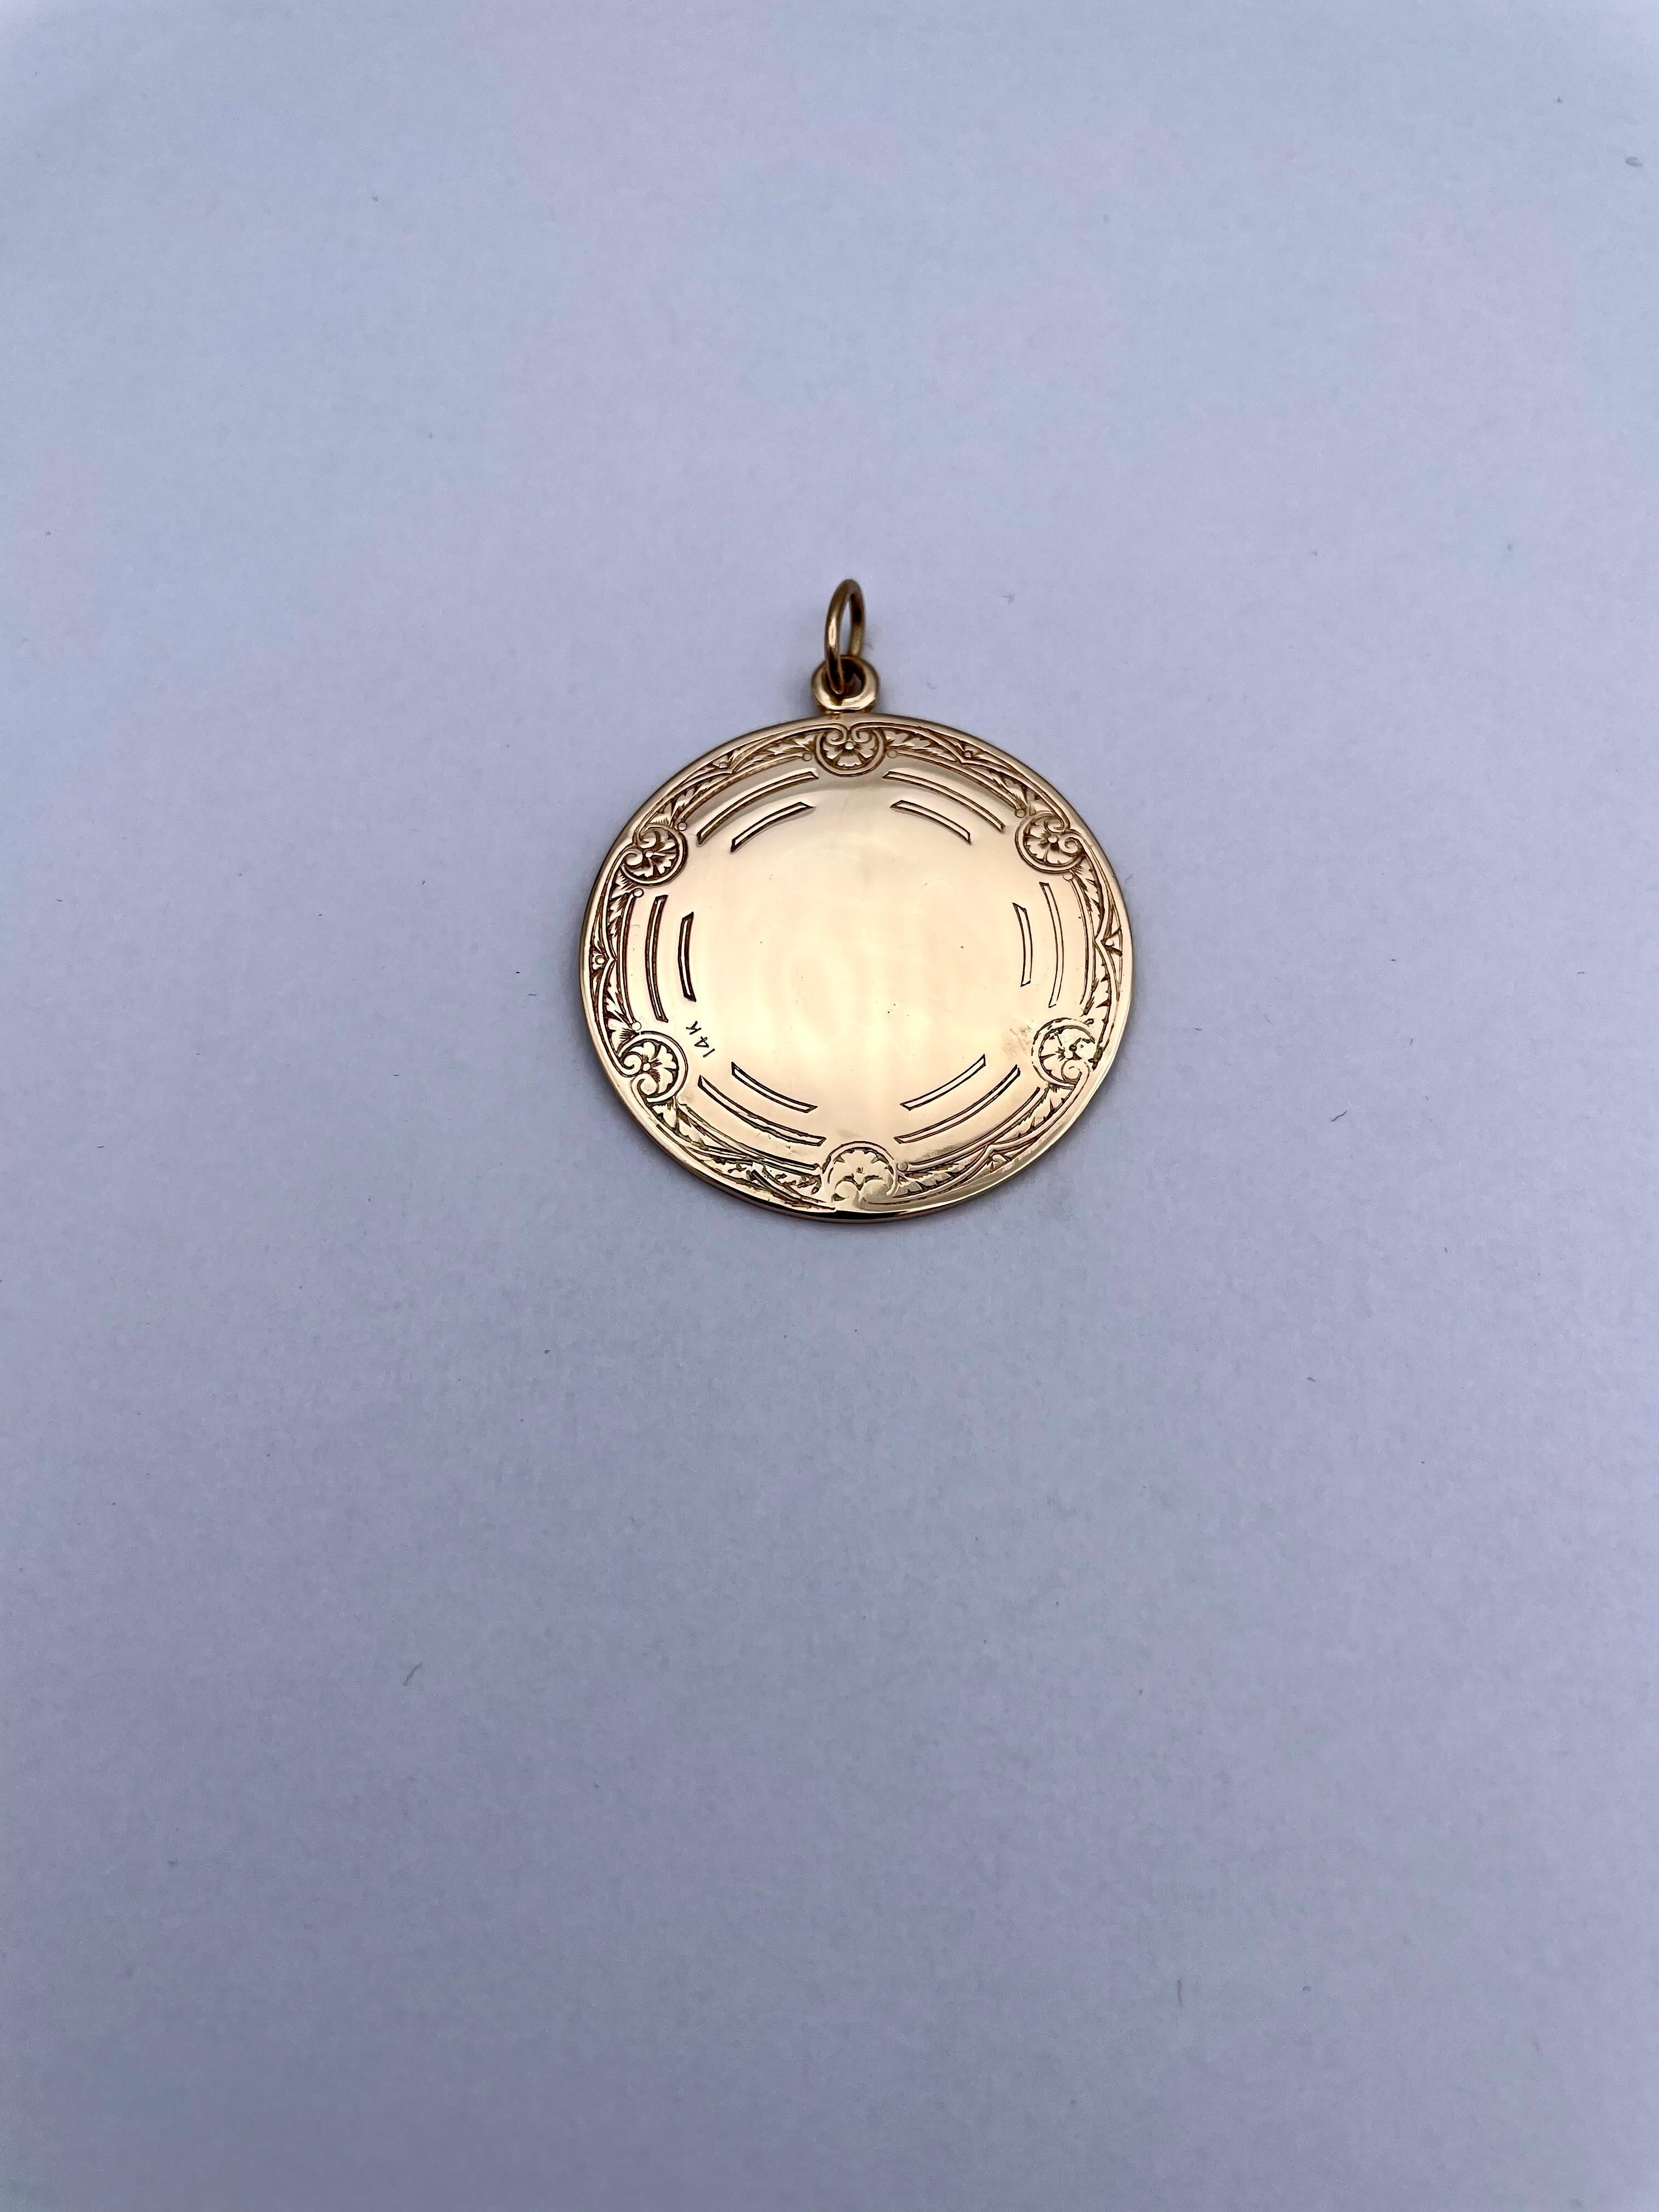 Striking large medallion/pendant/charm.  Depicting a deeply engraved fisherman, wearing a hat, with a fishing pole and a fish.  He is standing in the water, with hills and mountains in the distance.  The reverse side has a finely engraved border,